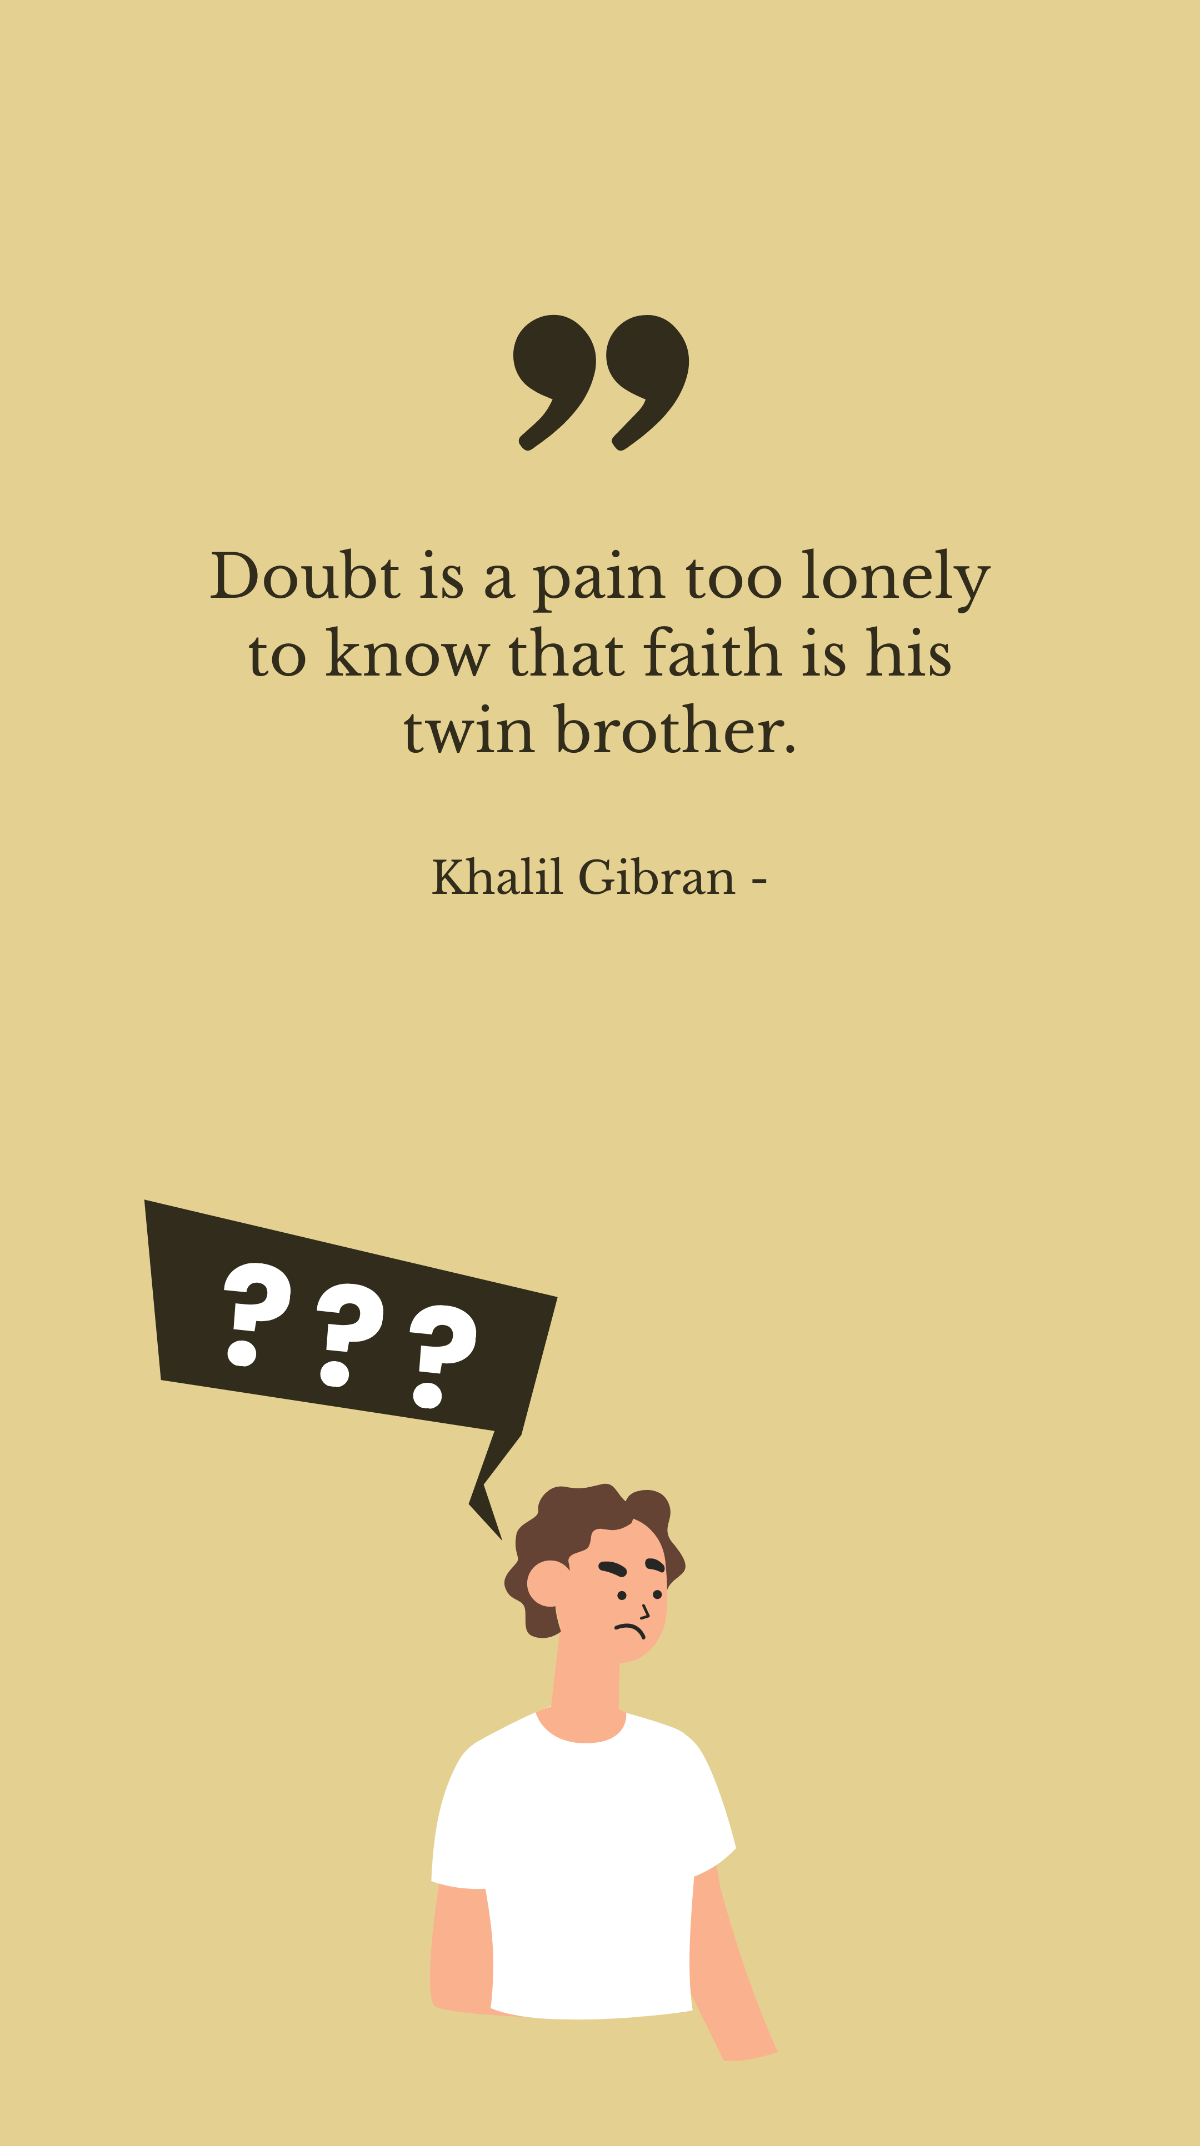 Free Khalil Gibran - Doubt is a pain too lonely to know that faith is his twin brother. Template